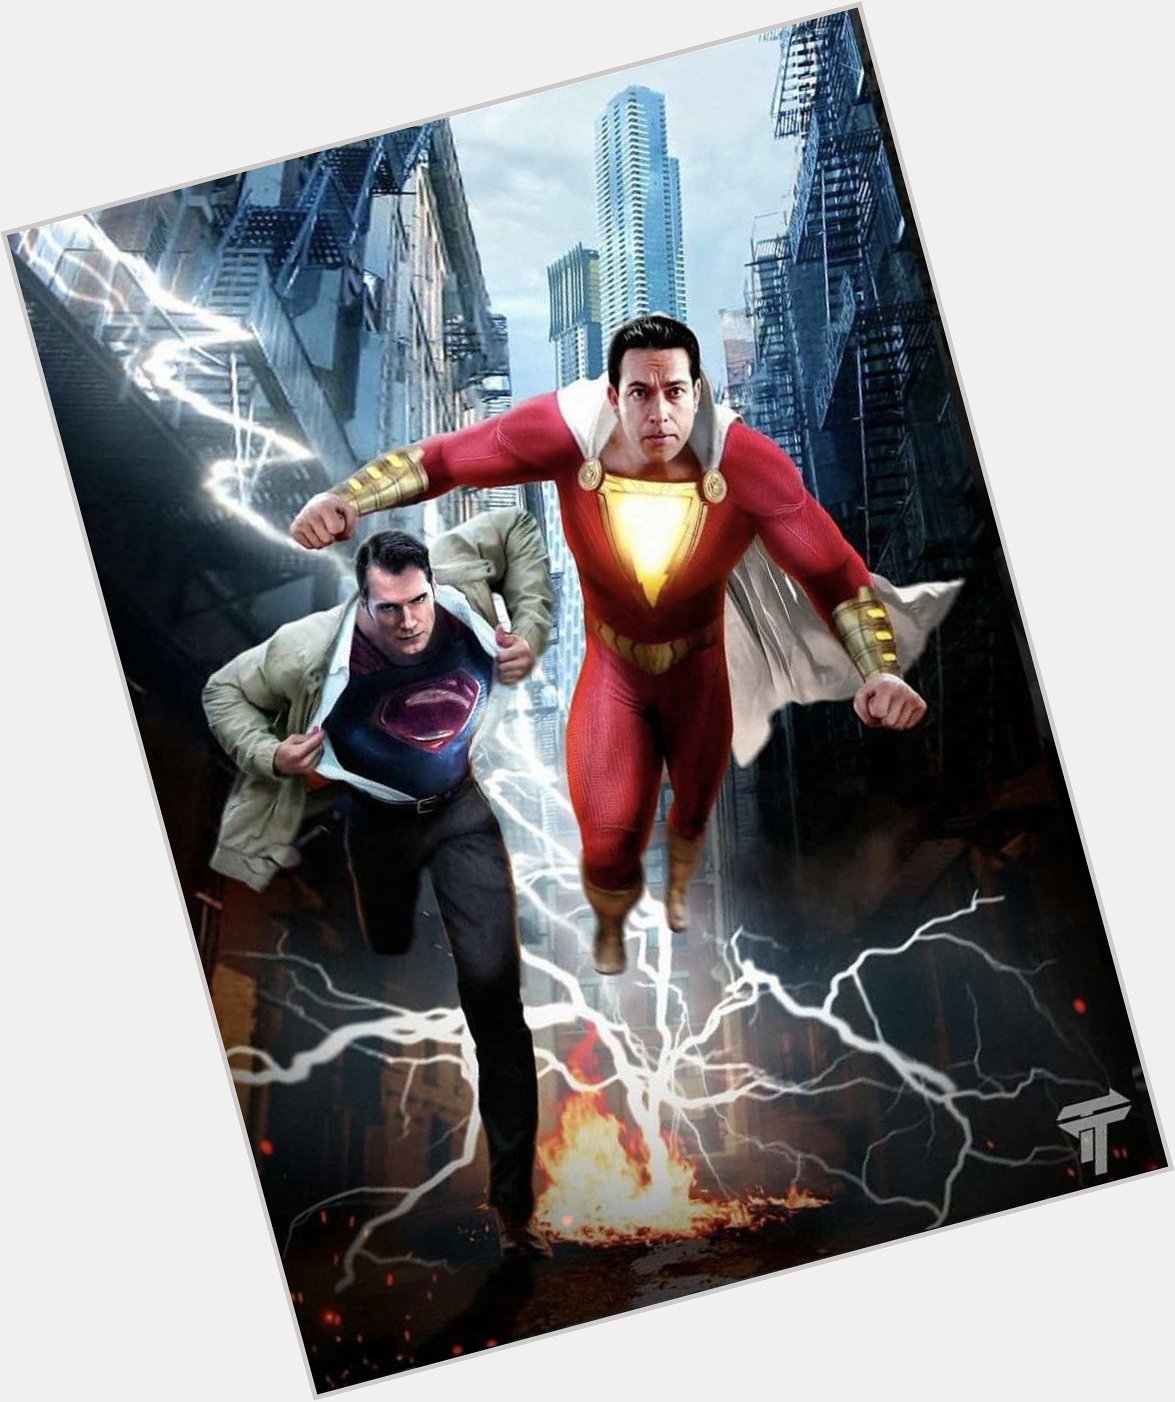   Can t wait for this duo and happy birthday Zachary Levi! SHAZAM!!!! 